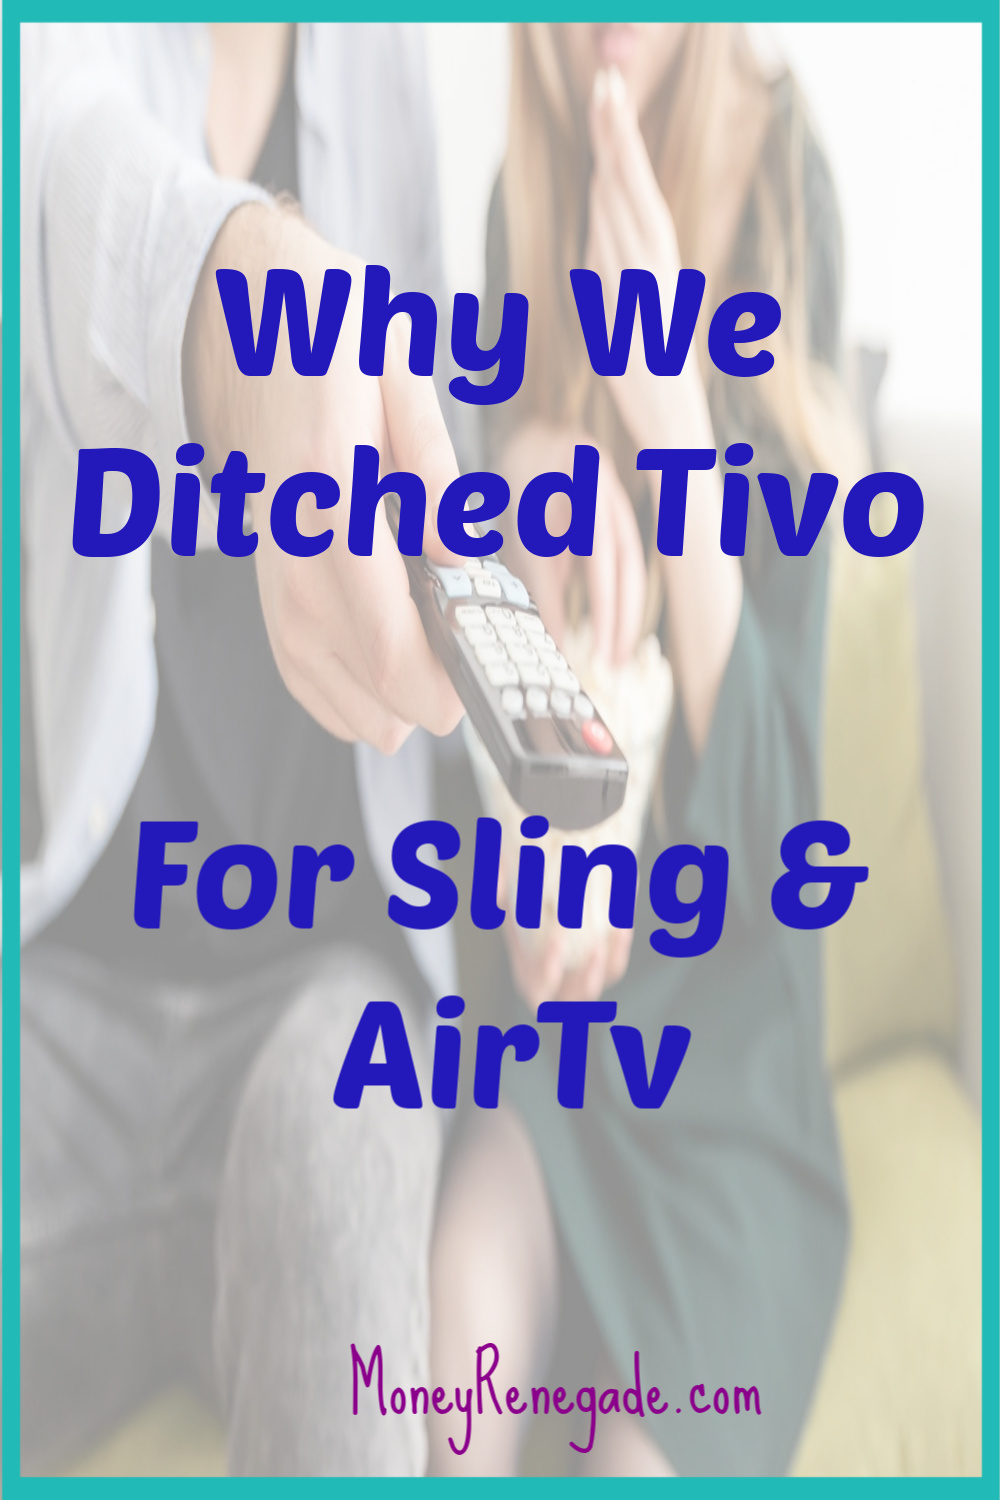 Ditch Tivo for Sling & AirTv